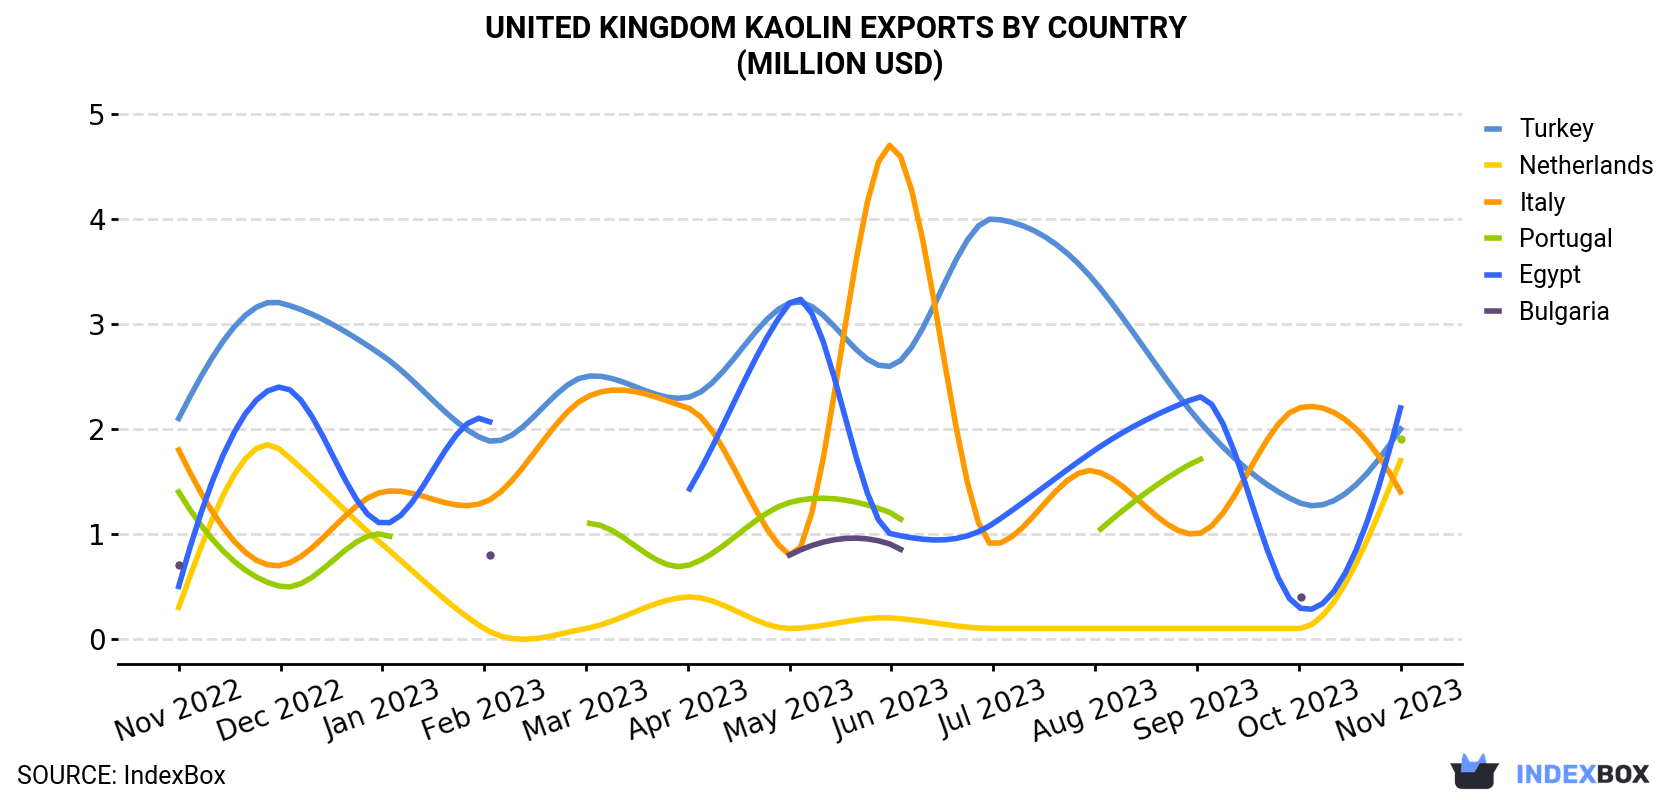 United Kingdom Kaolin Exports By Country (Million USD)